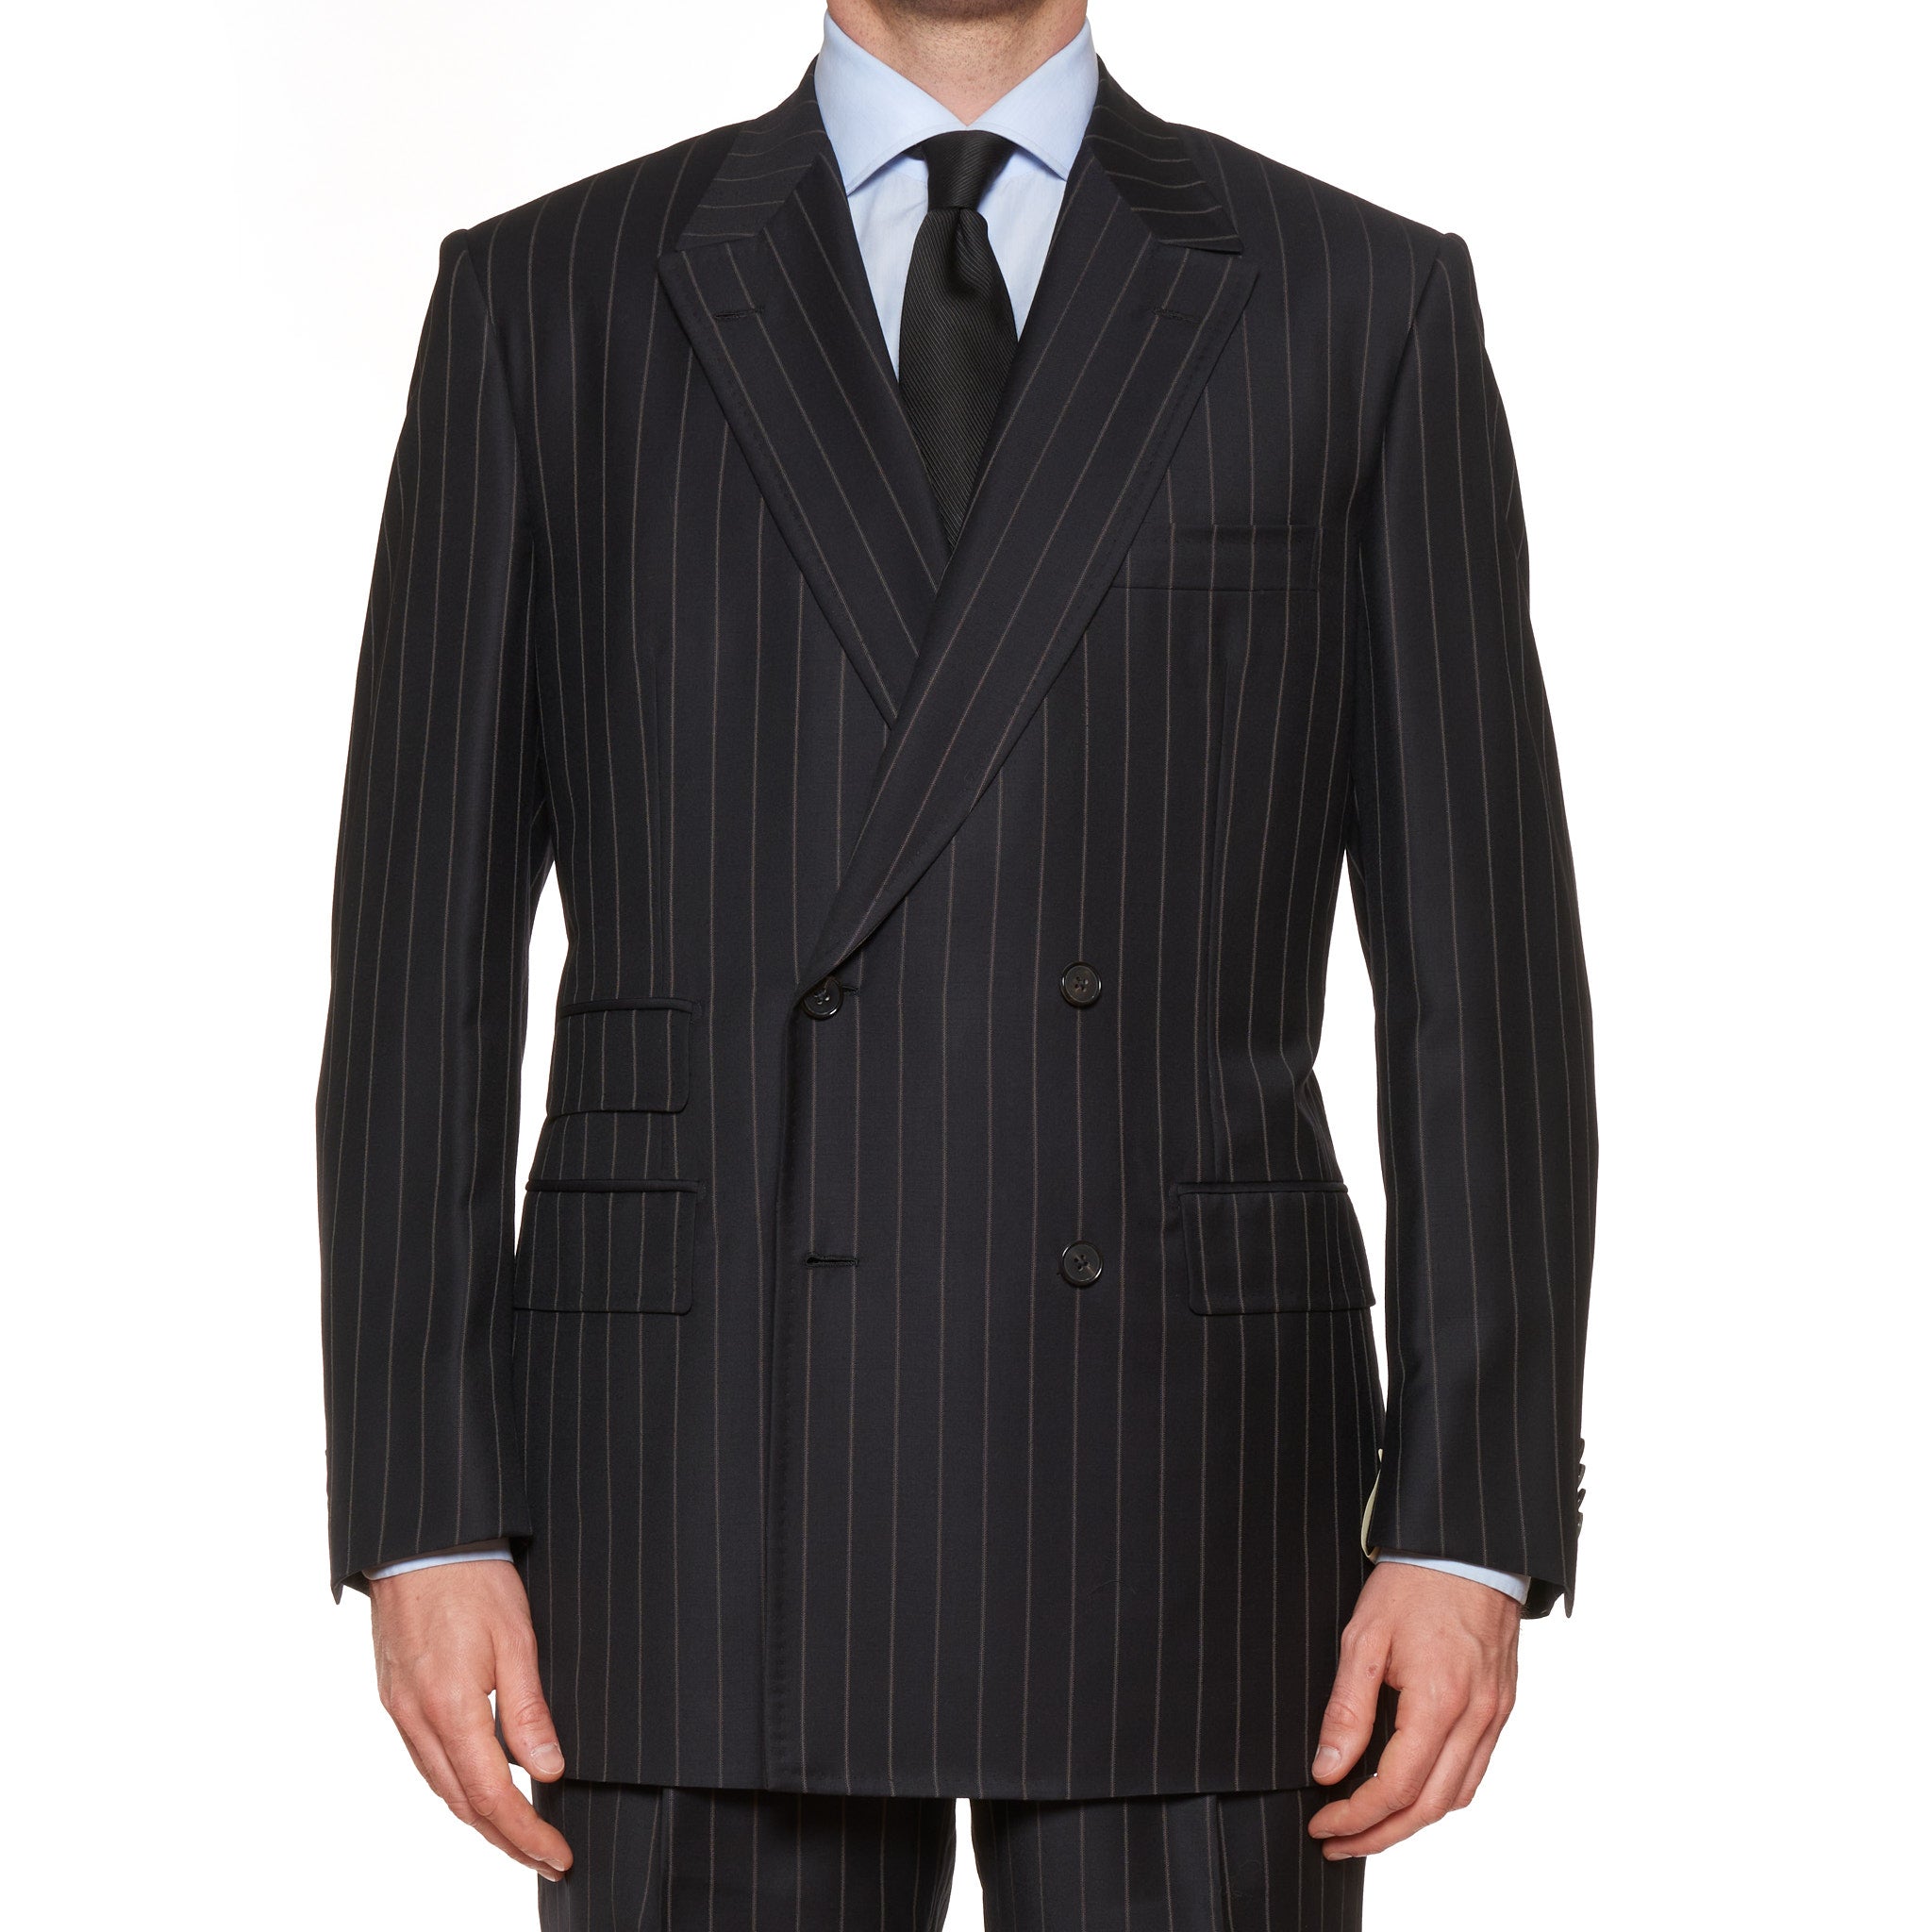 D'AVENZA For PAPE Handmade Black Striped Wool DB Suit EU 52 NEW US 42 D'AVENZA